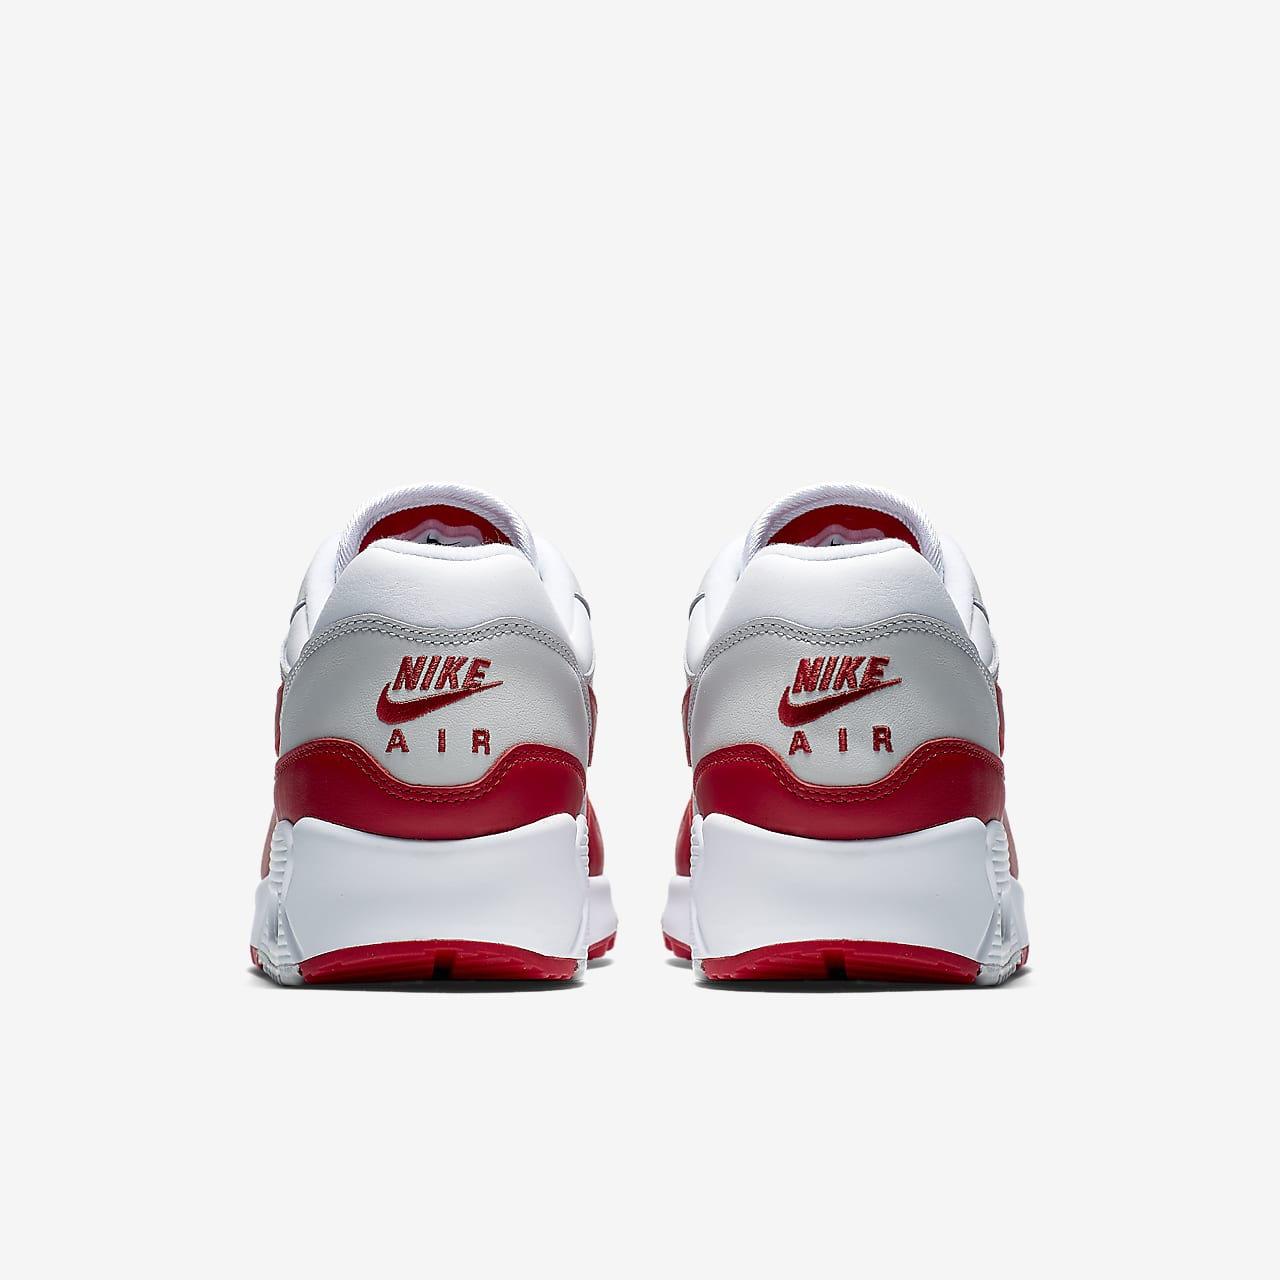 nike air max red and white mens